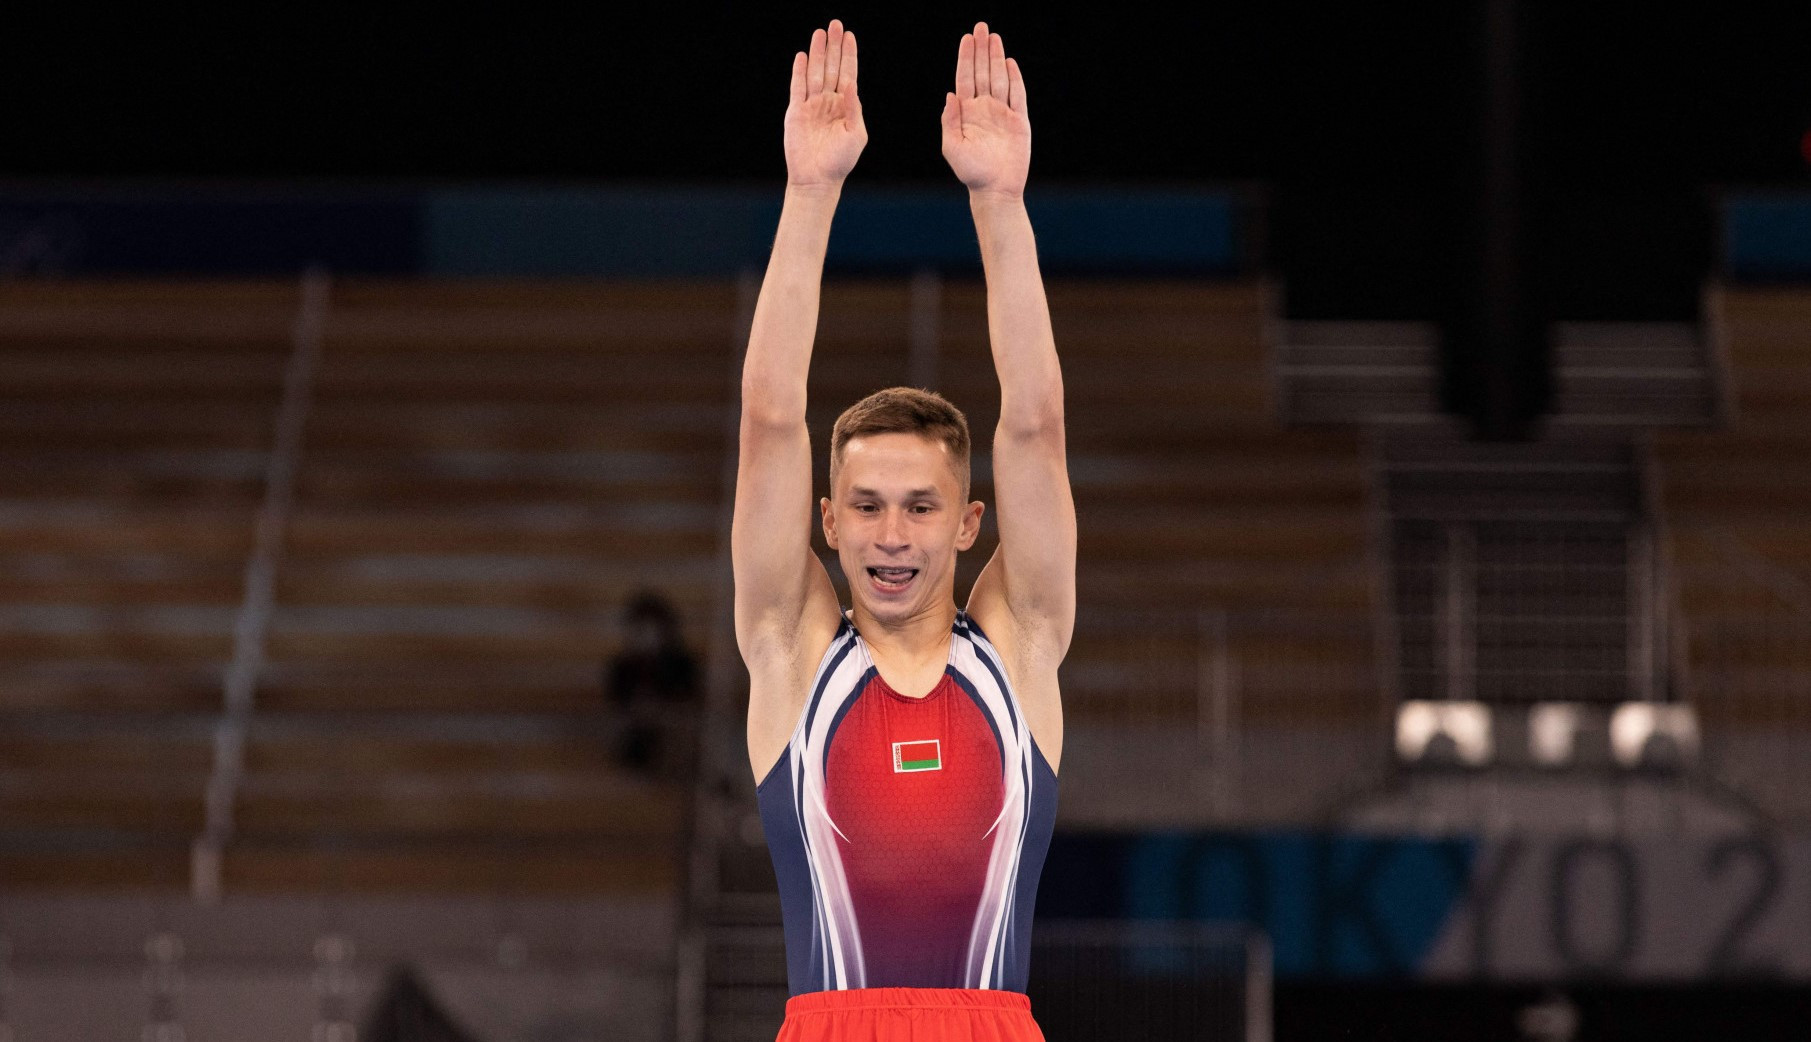 Belarus' Ivan Litvinovich crashed out at the semi-final of the men's individual event at the Trampoline World Championships ©Getty Images